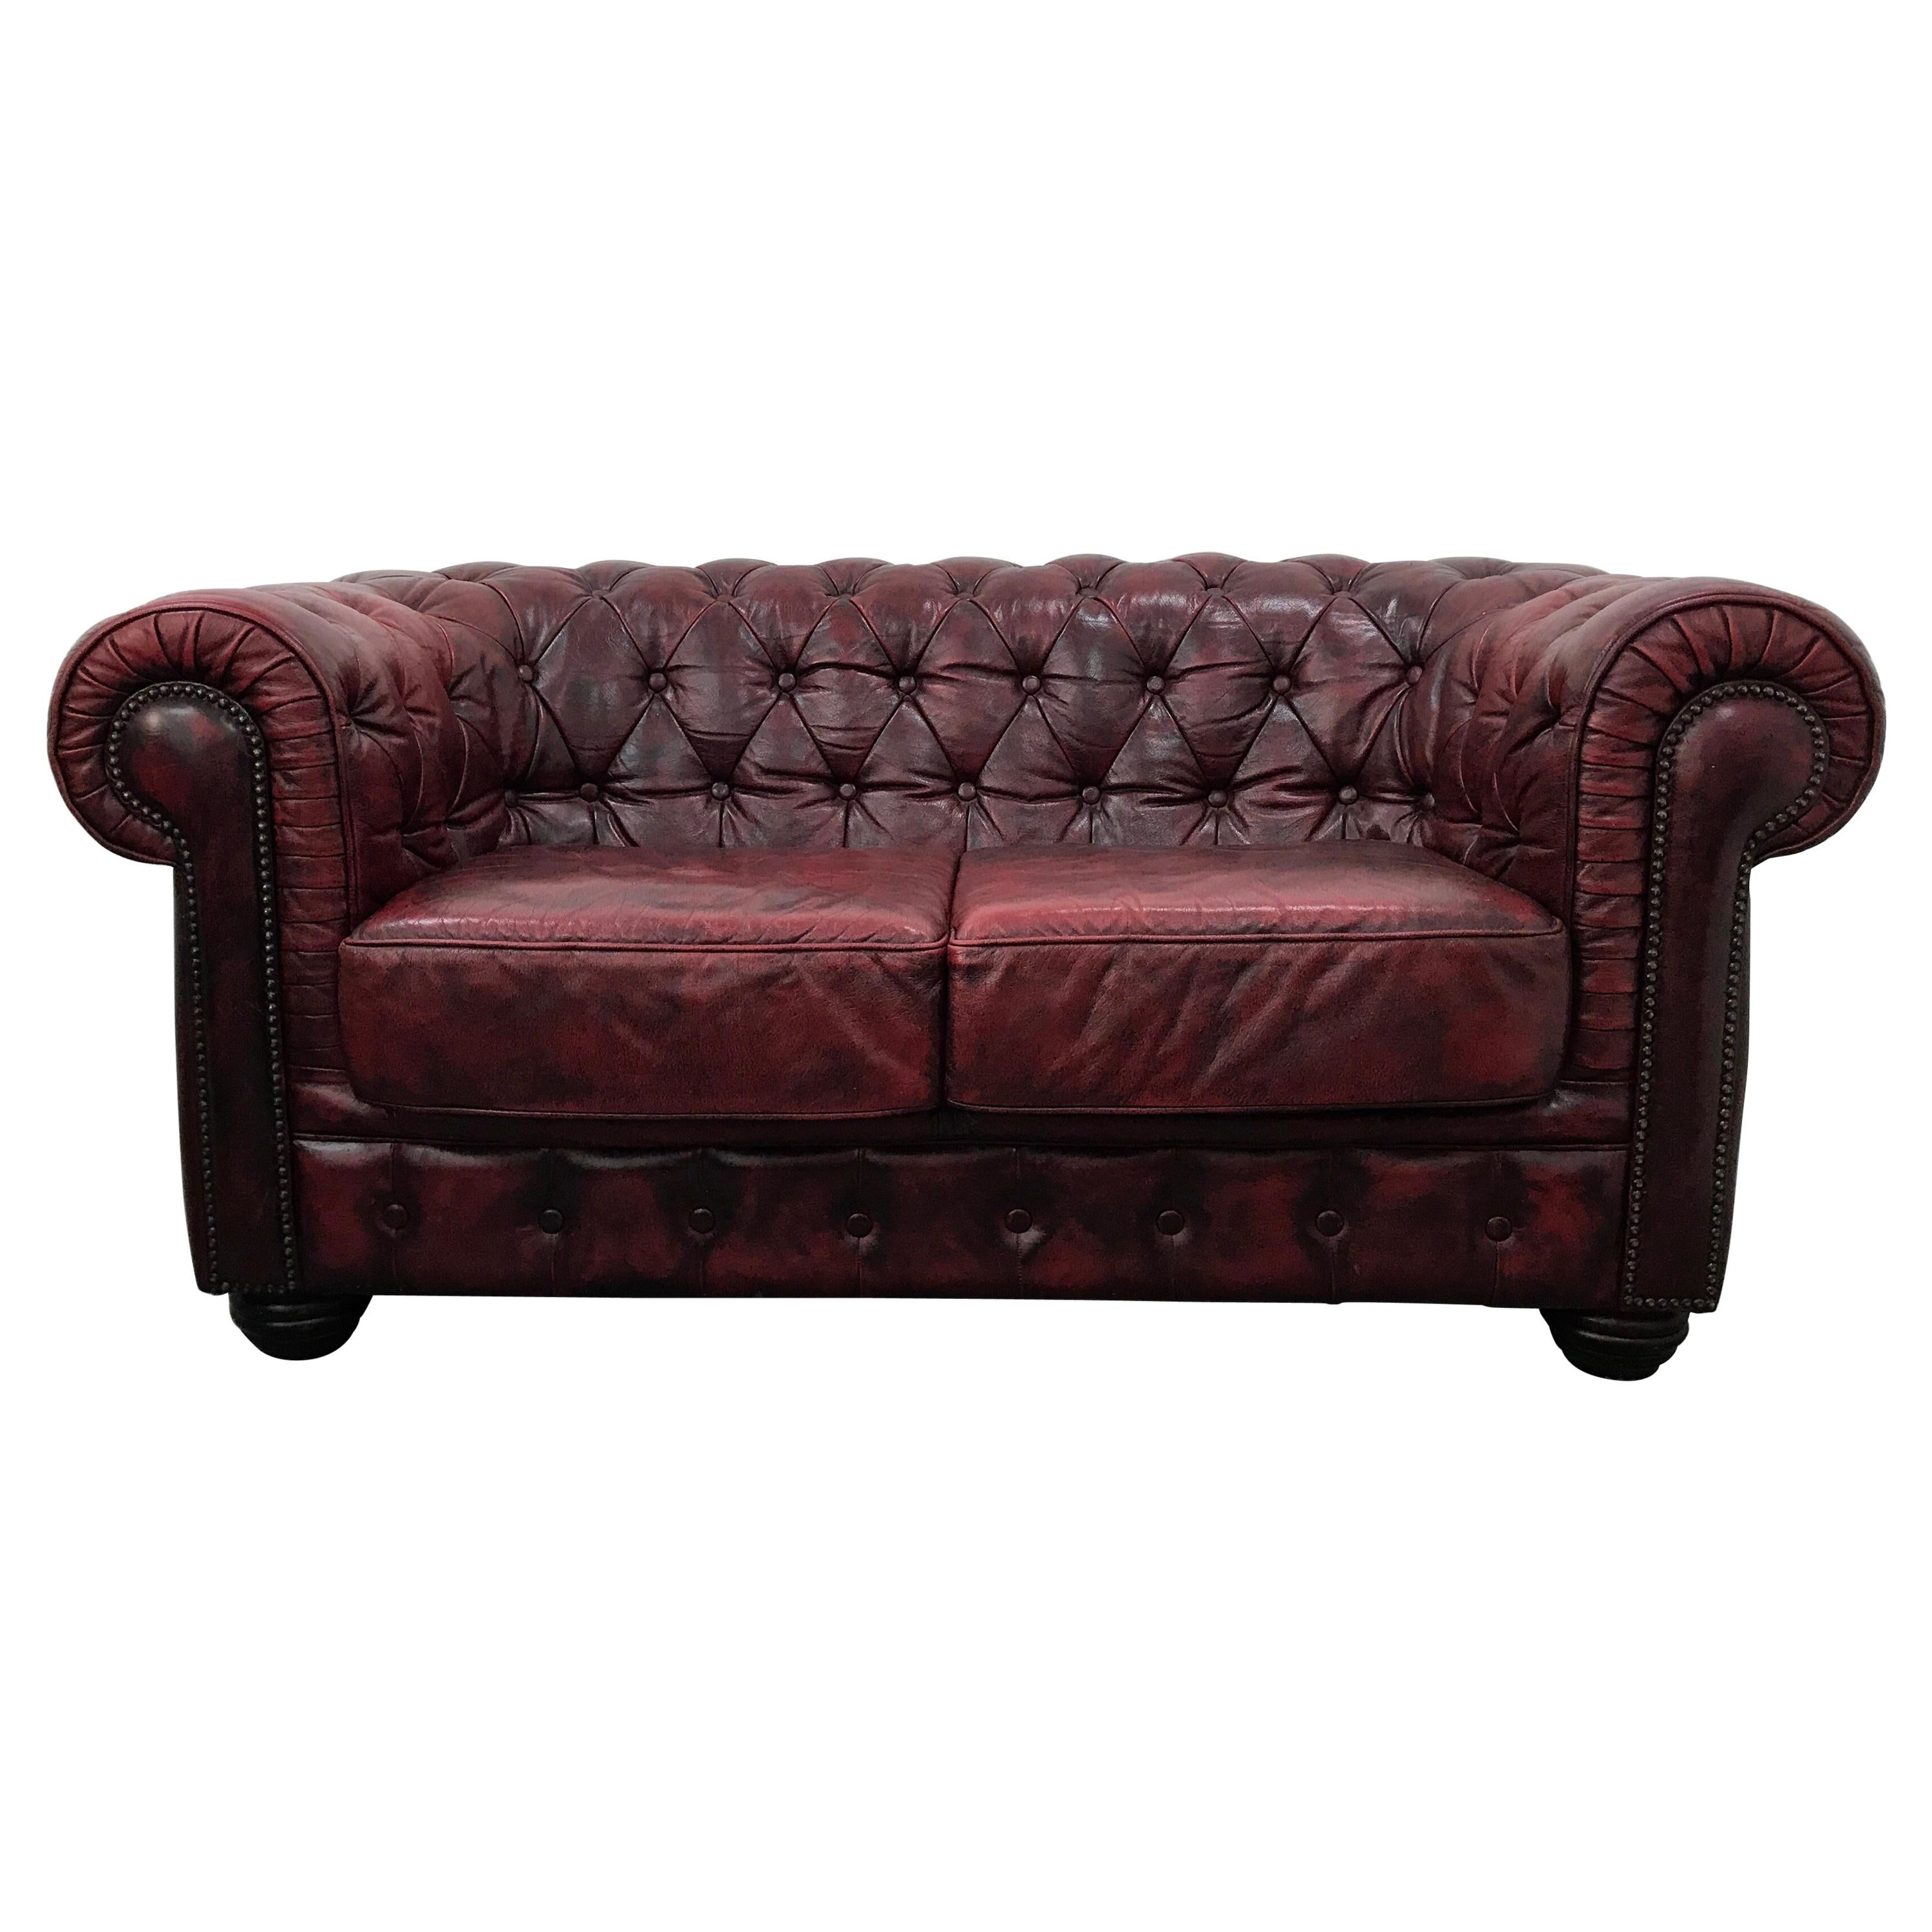 Vintage Oxblood Leather 2-Seater Chesterfield Sofa from Rubelli For Sale